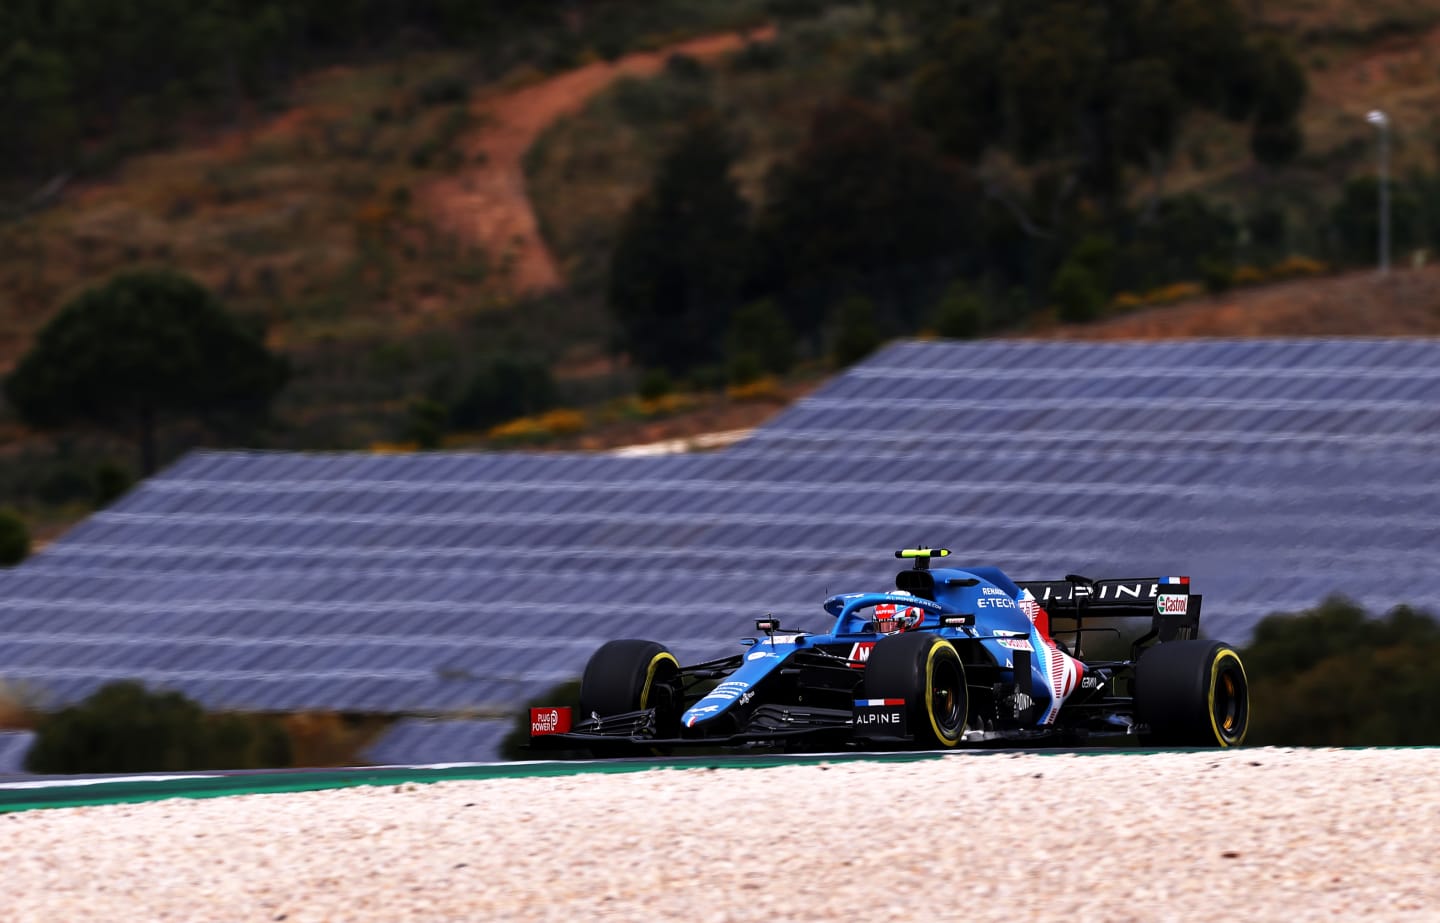 PORTIMAO, PORTUGAL - MAY 01: Esteban Ocon of France driving the (31) Alpine A521 Renault on track